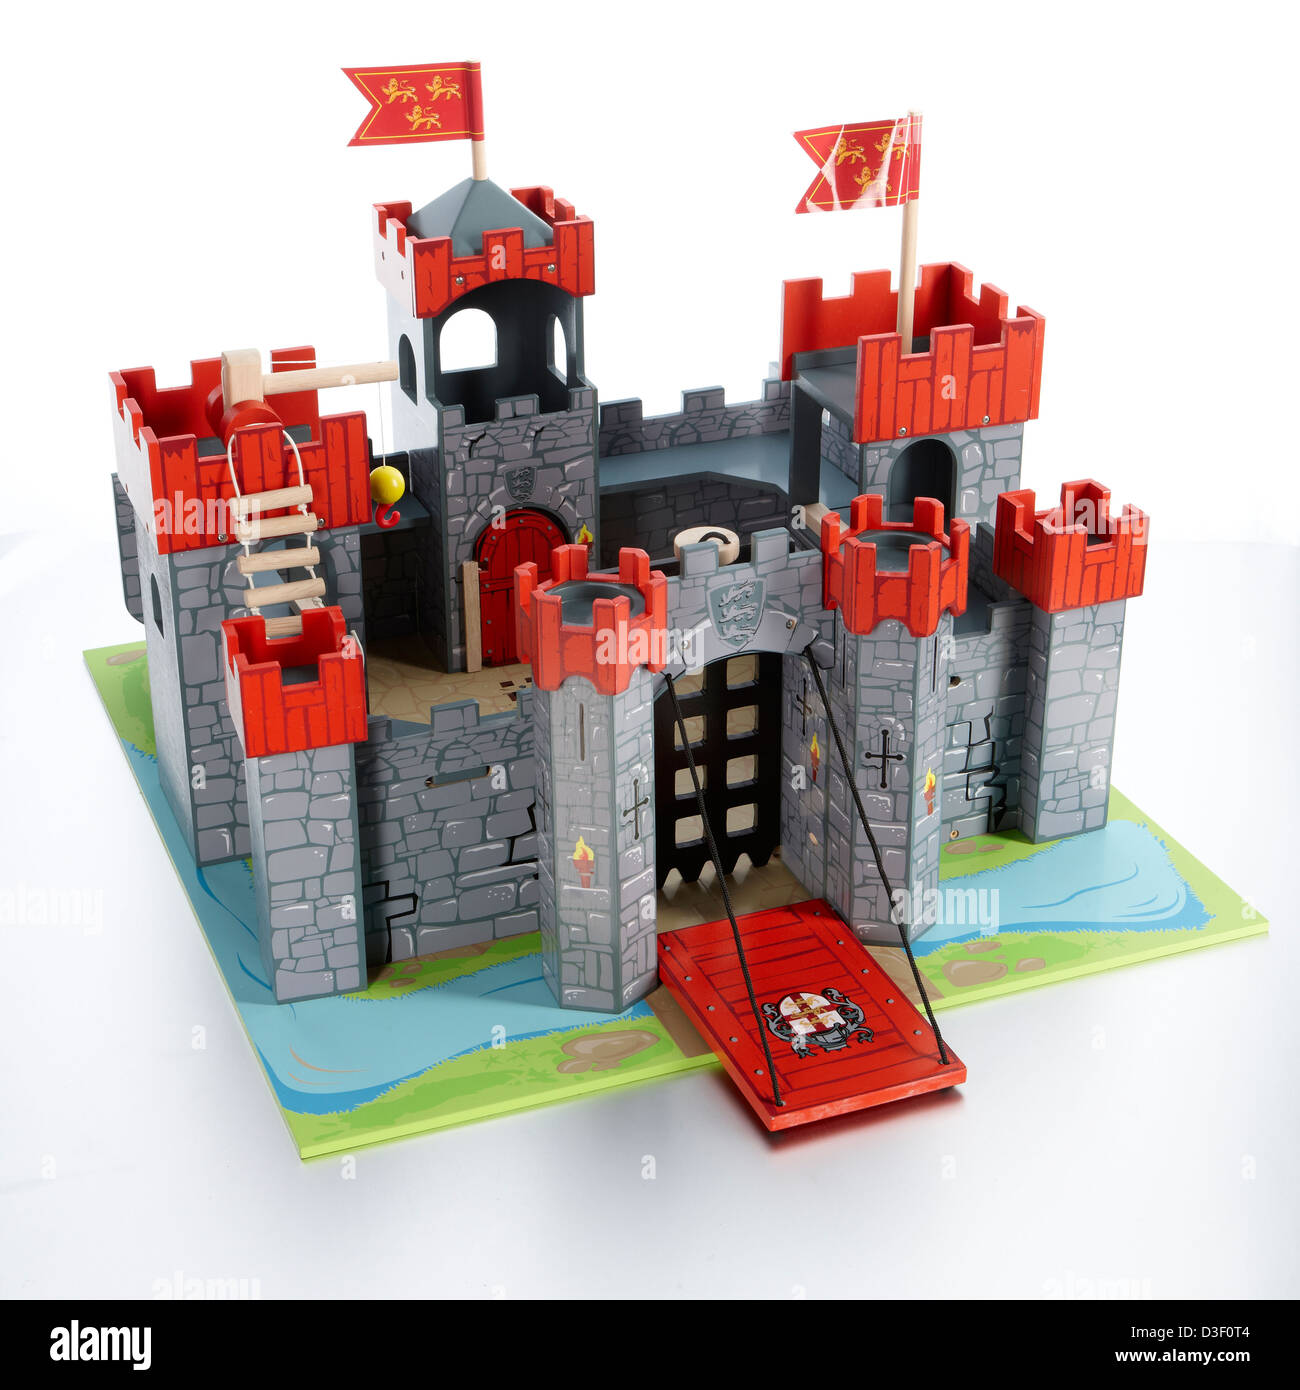 COLOSSAL FORT KIT - Toydle! Toy Forts